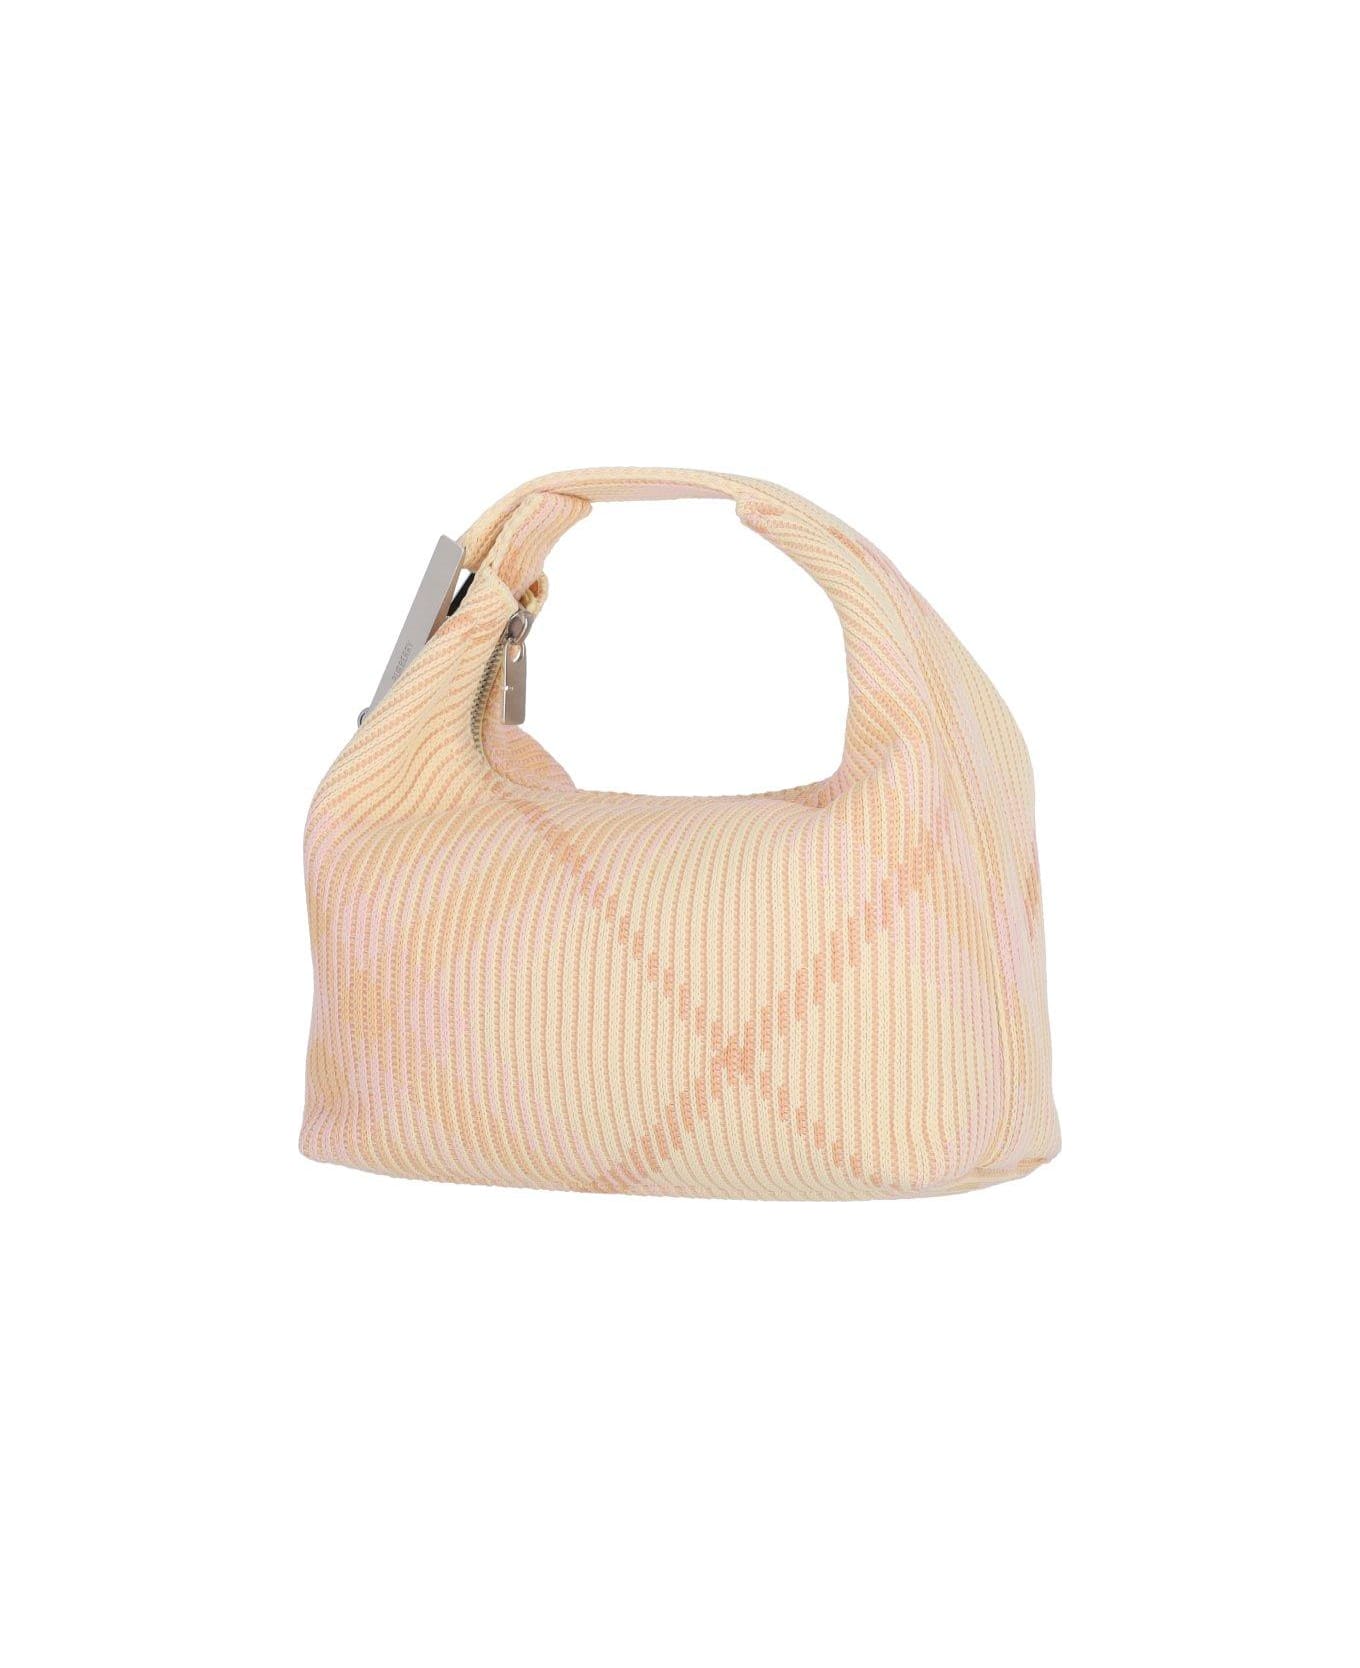 Burberry Check Pattern Zipped Tote Bag - Pink